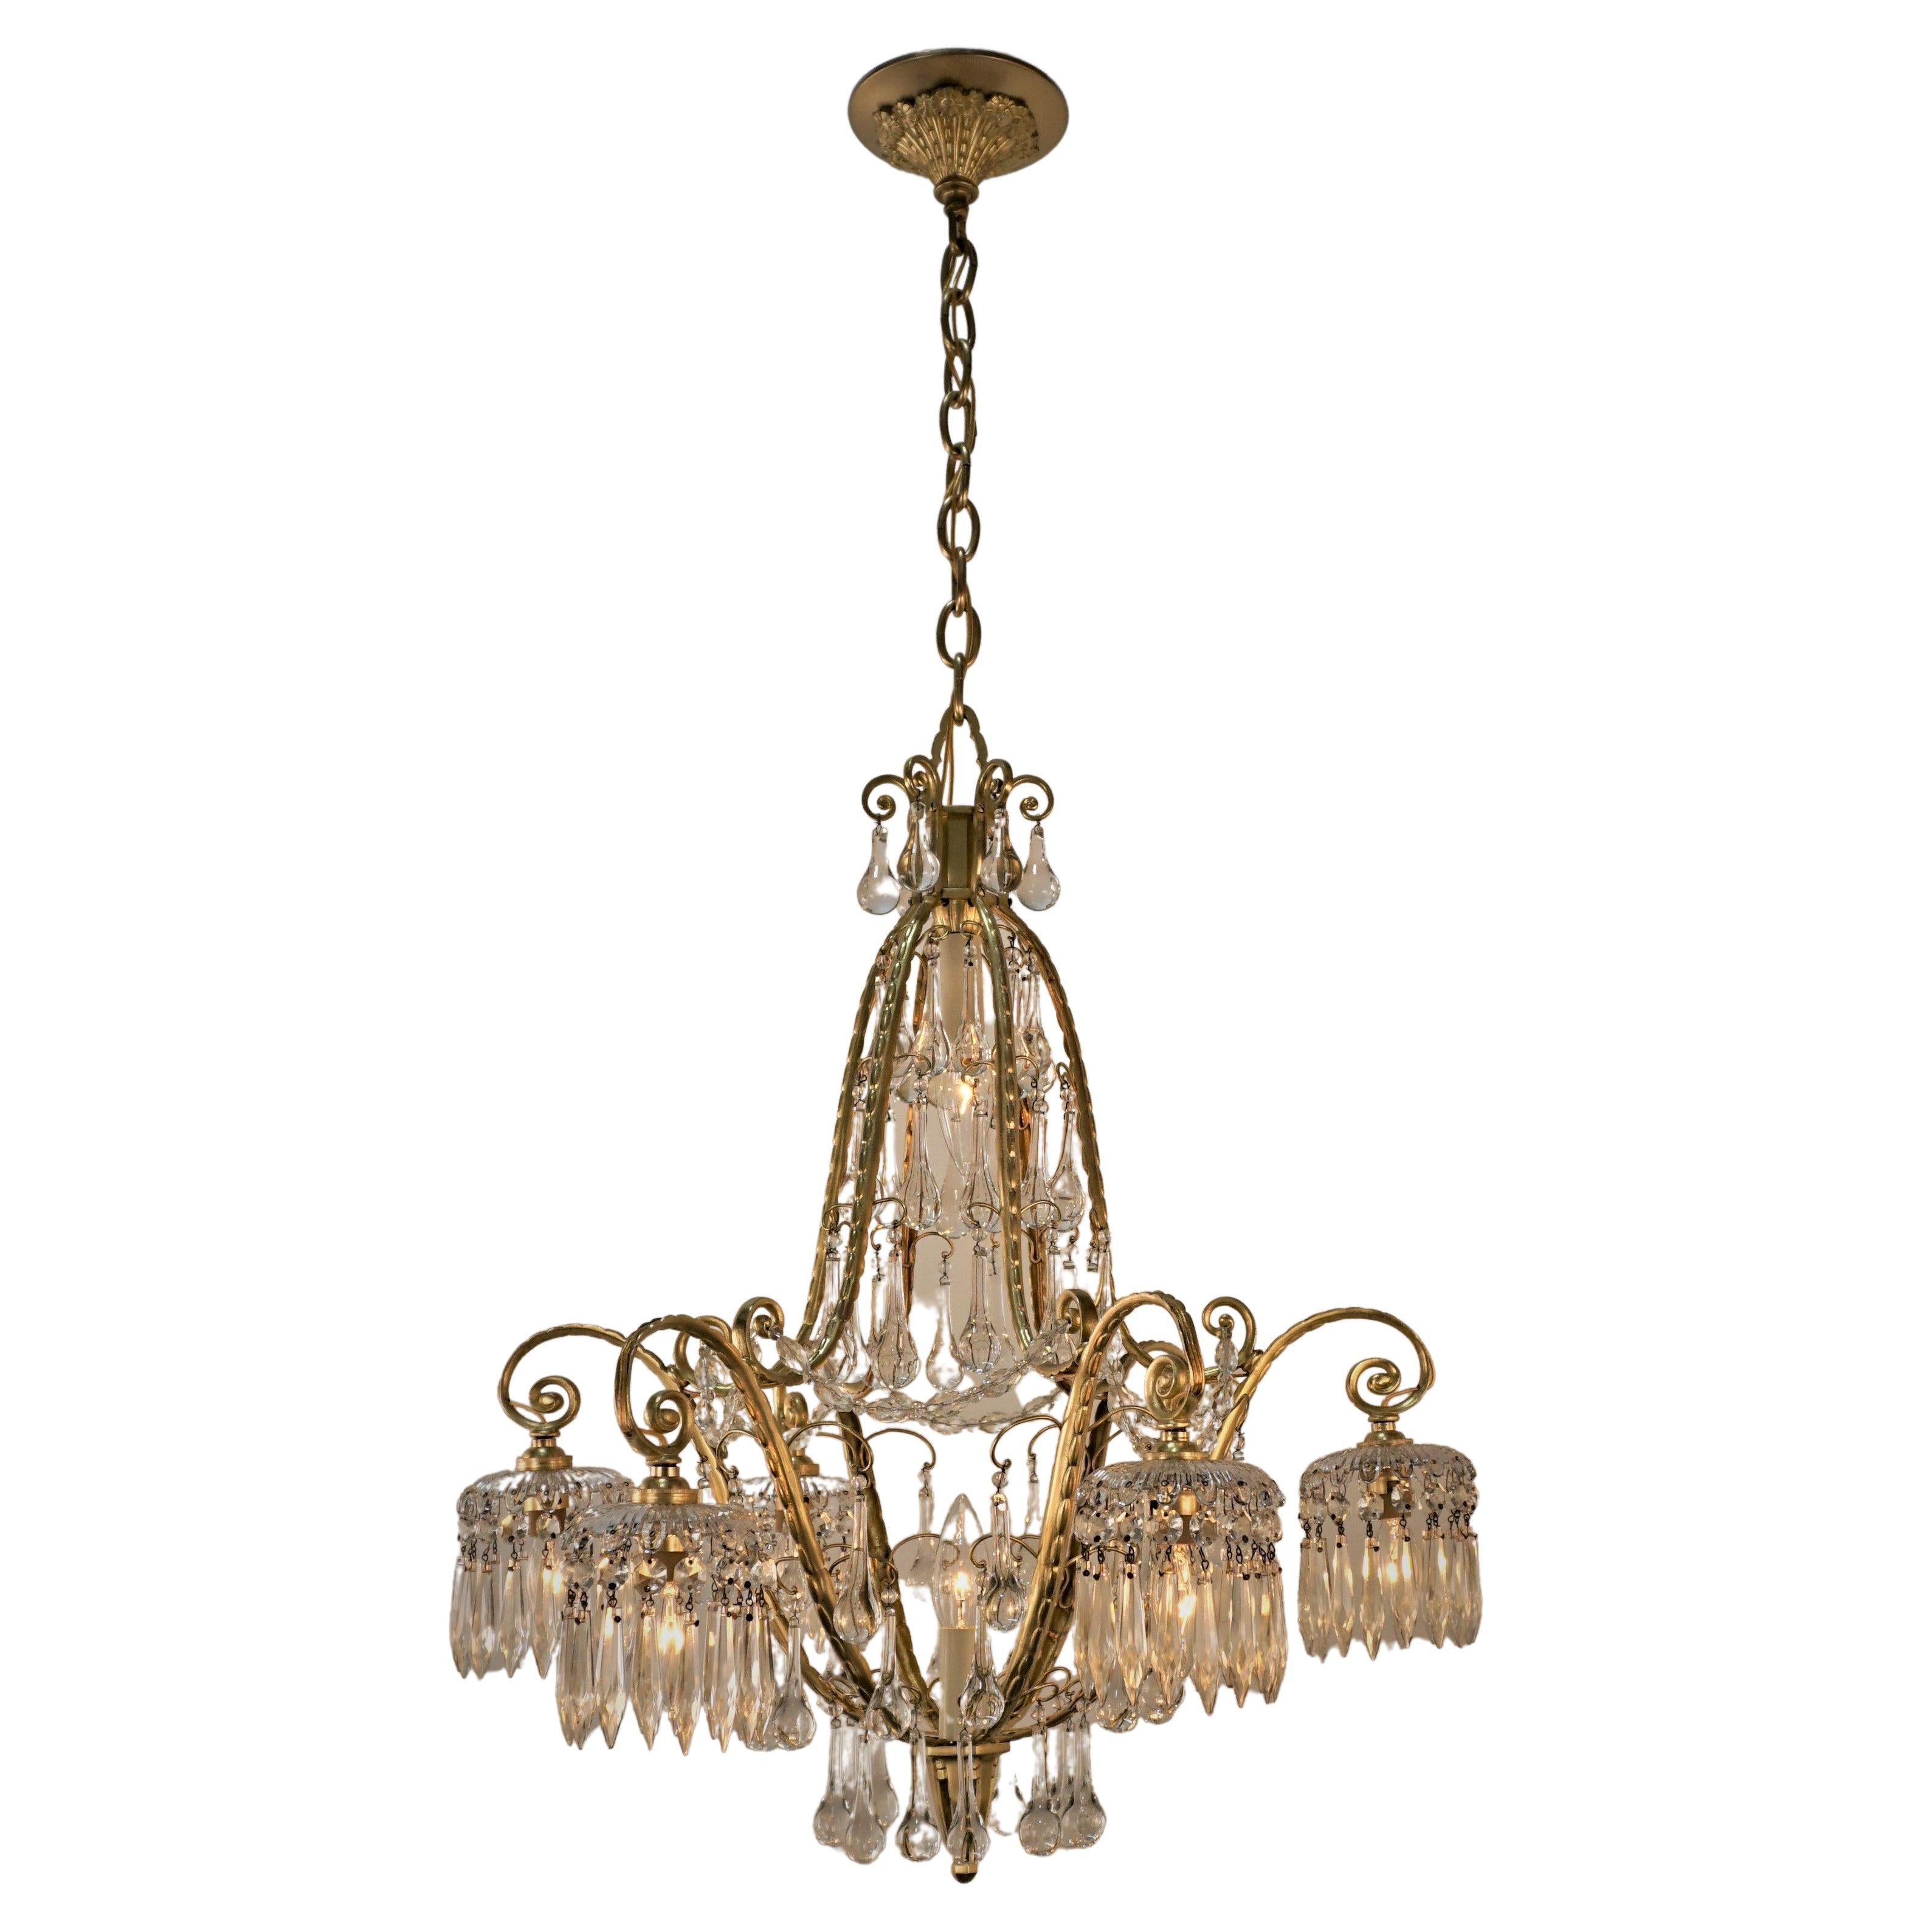 Elegant design from France dated 1930s has sparkling crystal and beautiful cast bronze chandelier.
Measurement: 22